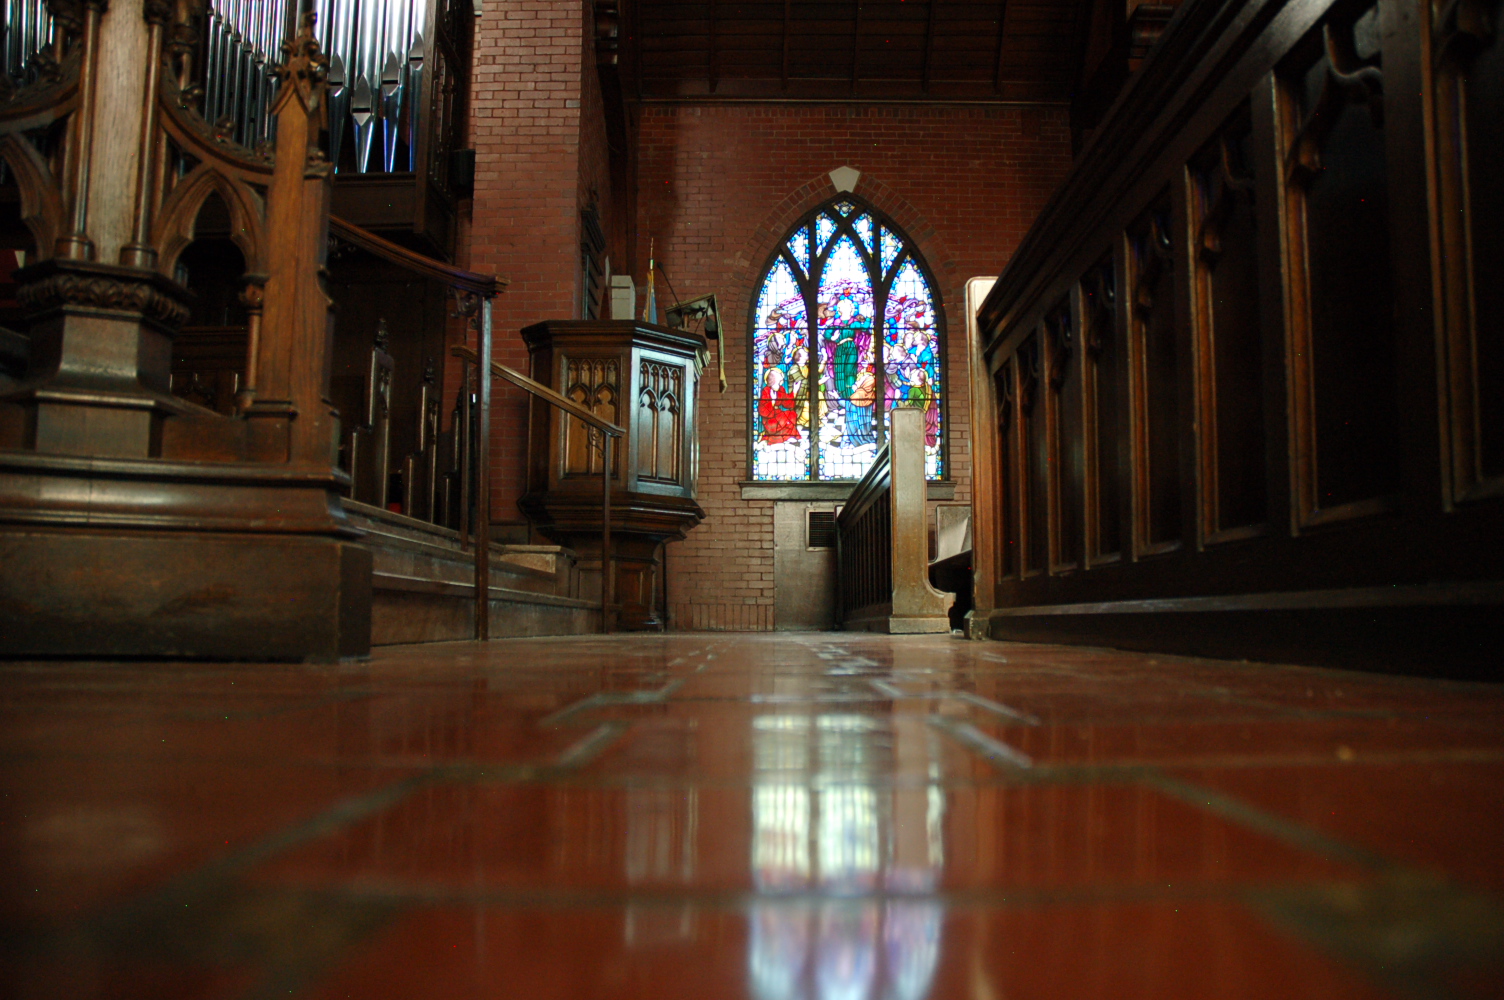 view of pulpit, stained glass window, and front pew with light reflecting through window onto polished brick floor